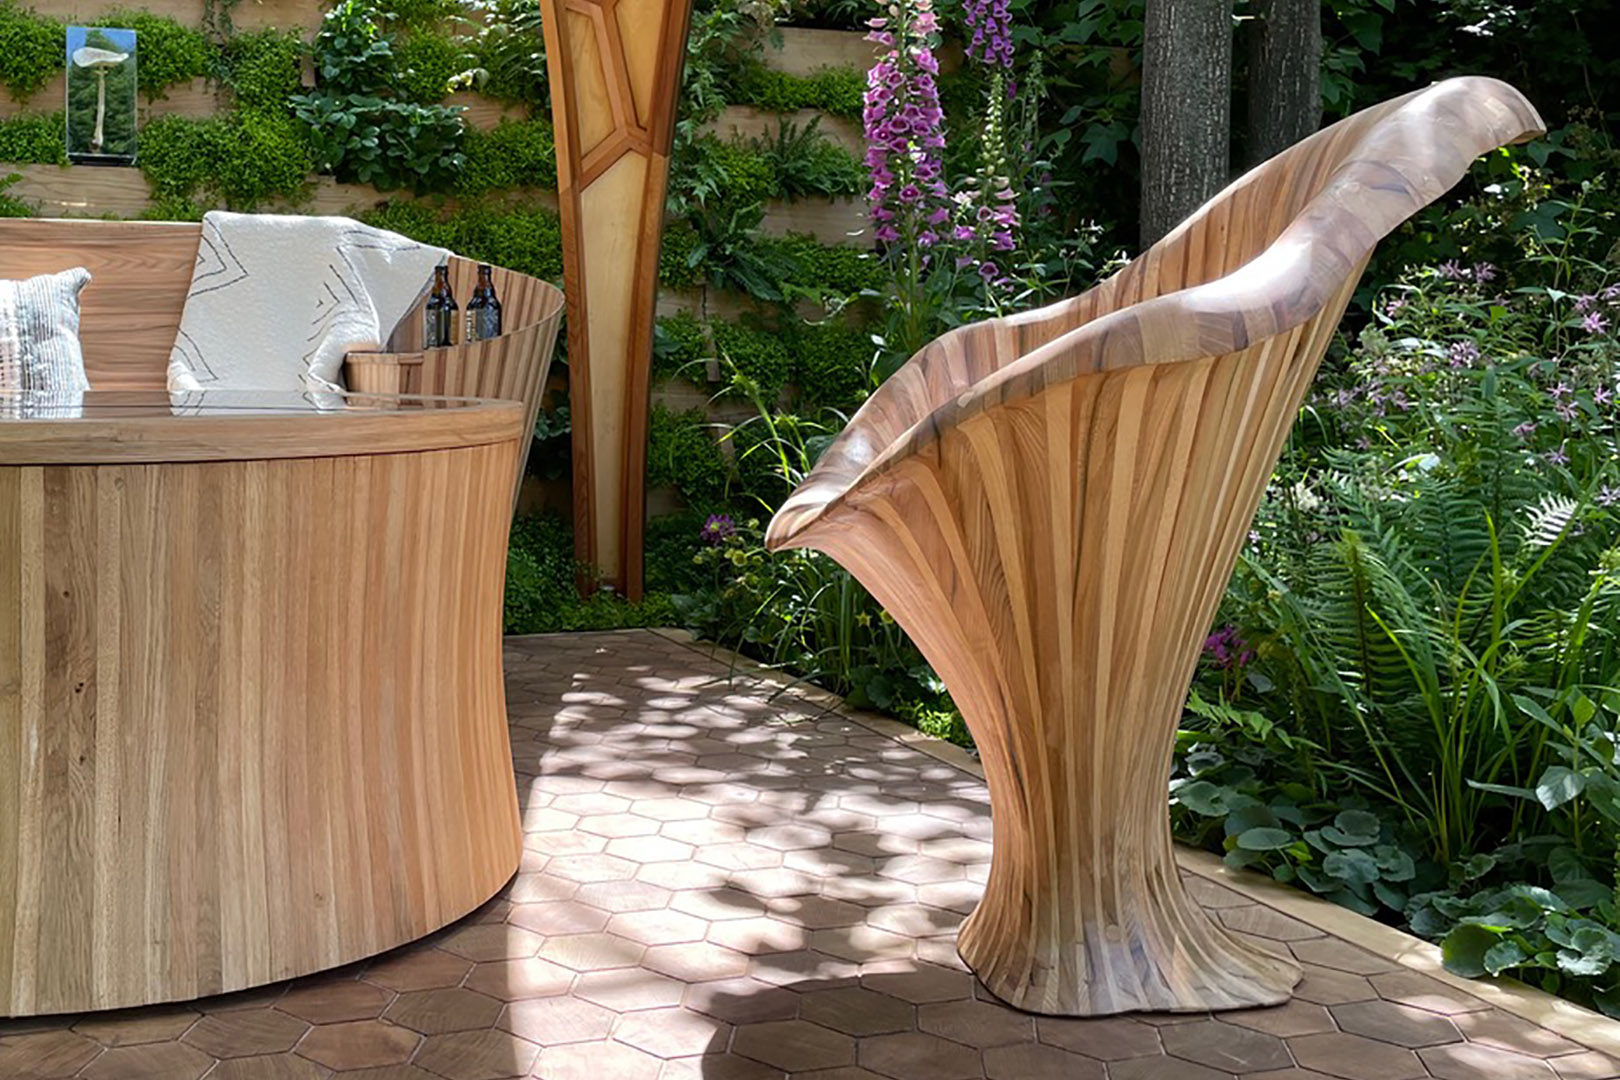 In situ view of the chanterelle mushroom chair from the Meta garden, RHS Chelsea Flower show